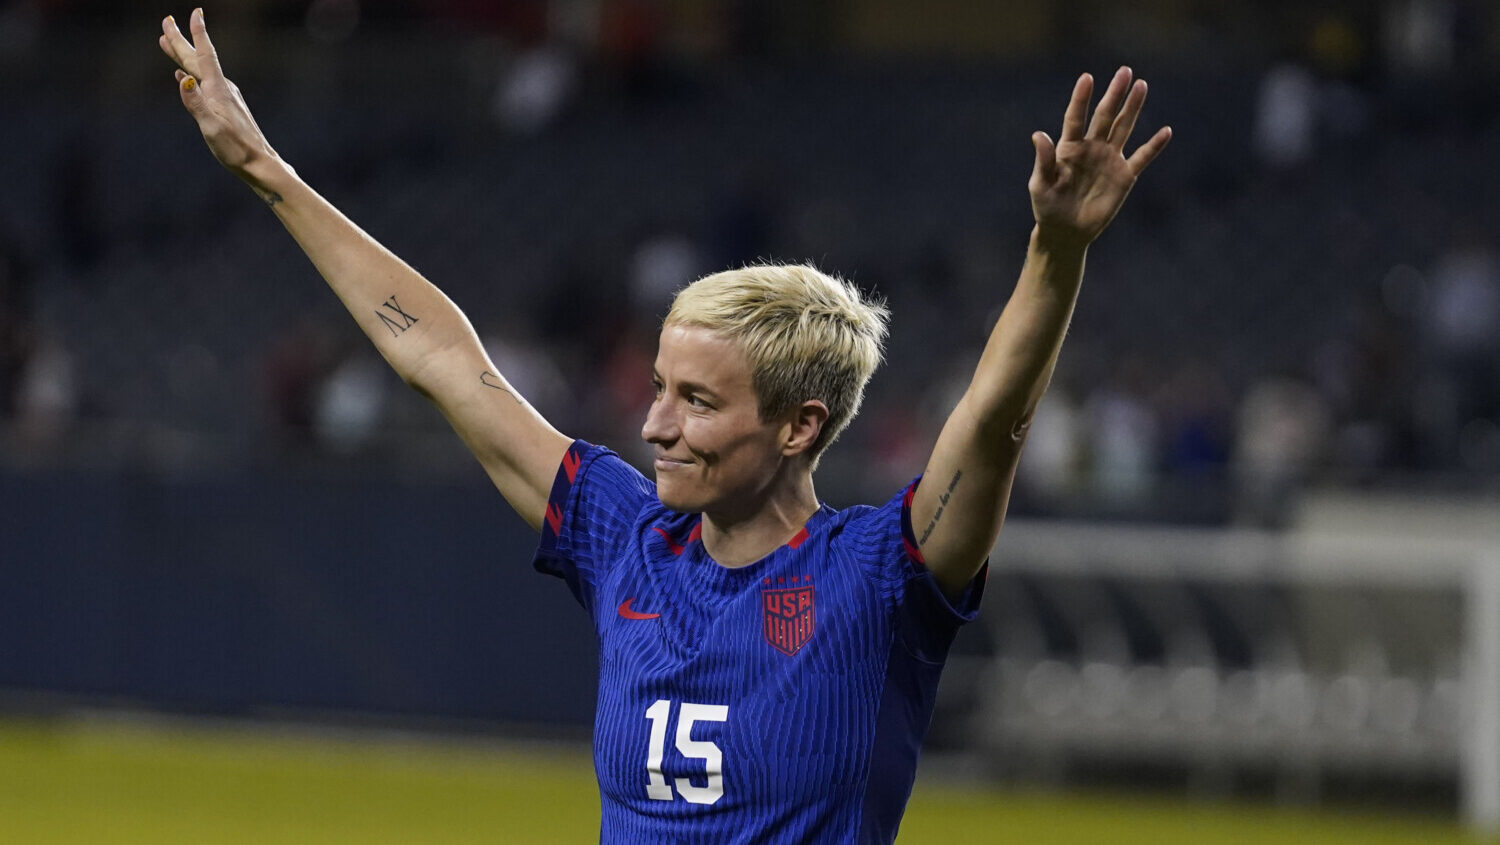 Megan Rapinoe says goodbye to her pro soccer career with final victory